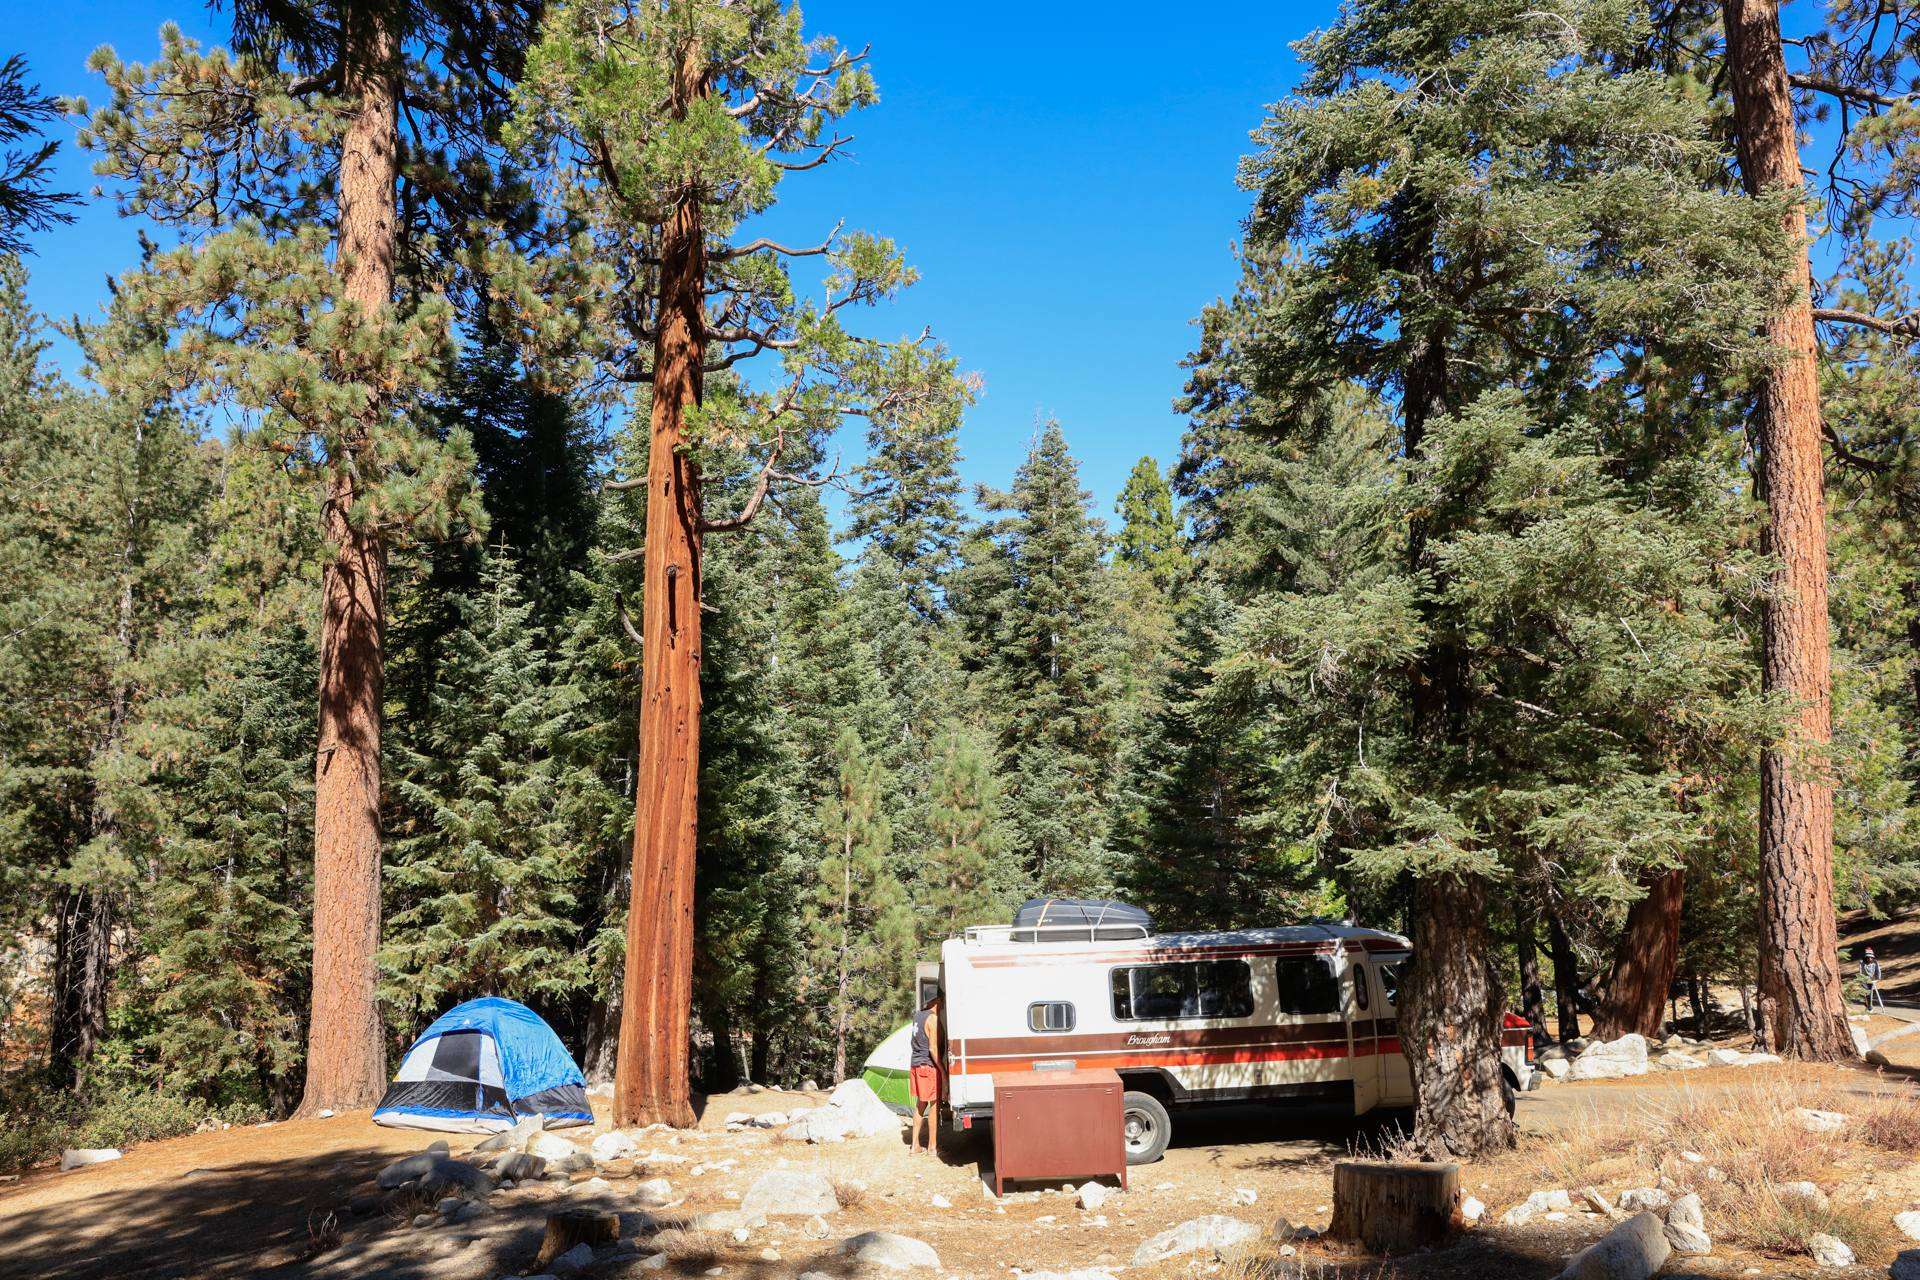 Eight Great Camping Sites Near Los Angeles